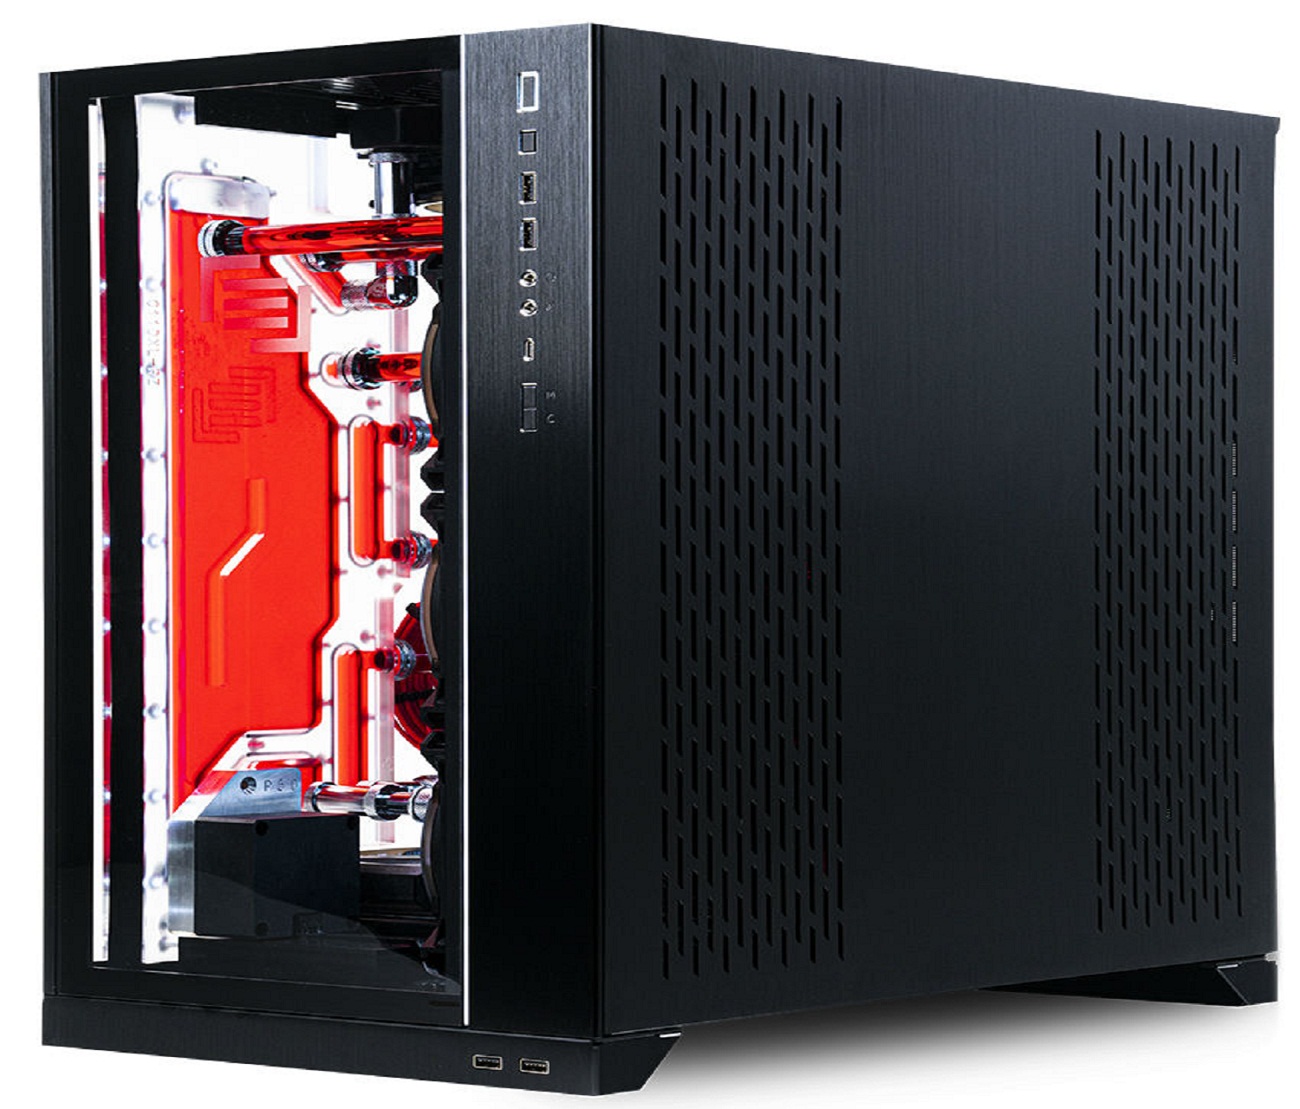 Maingear Relaunches Its Brain-Child ‘The Rush Series’ Boosted To Support The Most Extreme Of Hardware